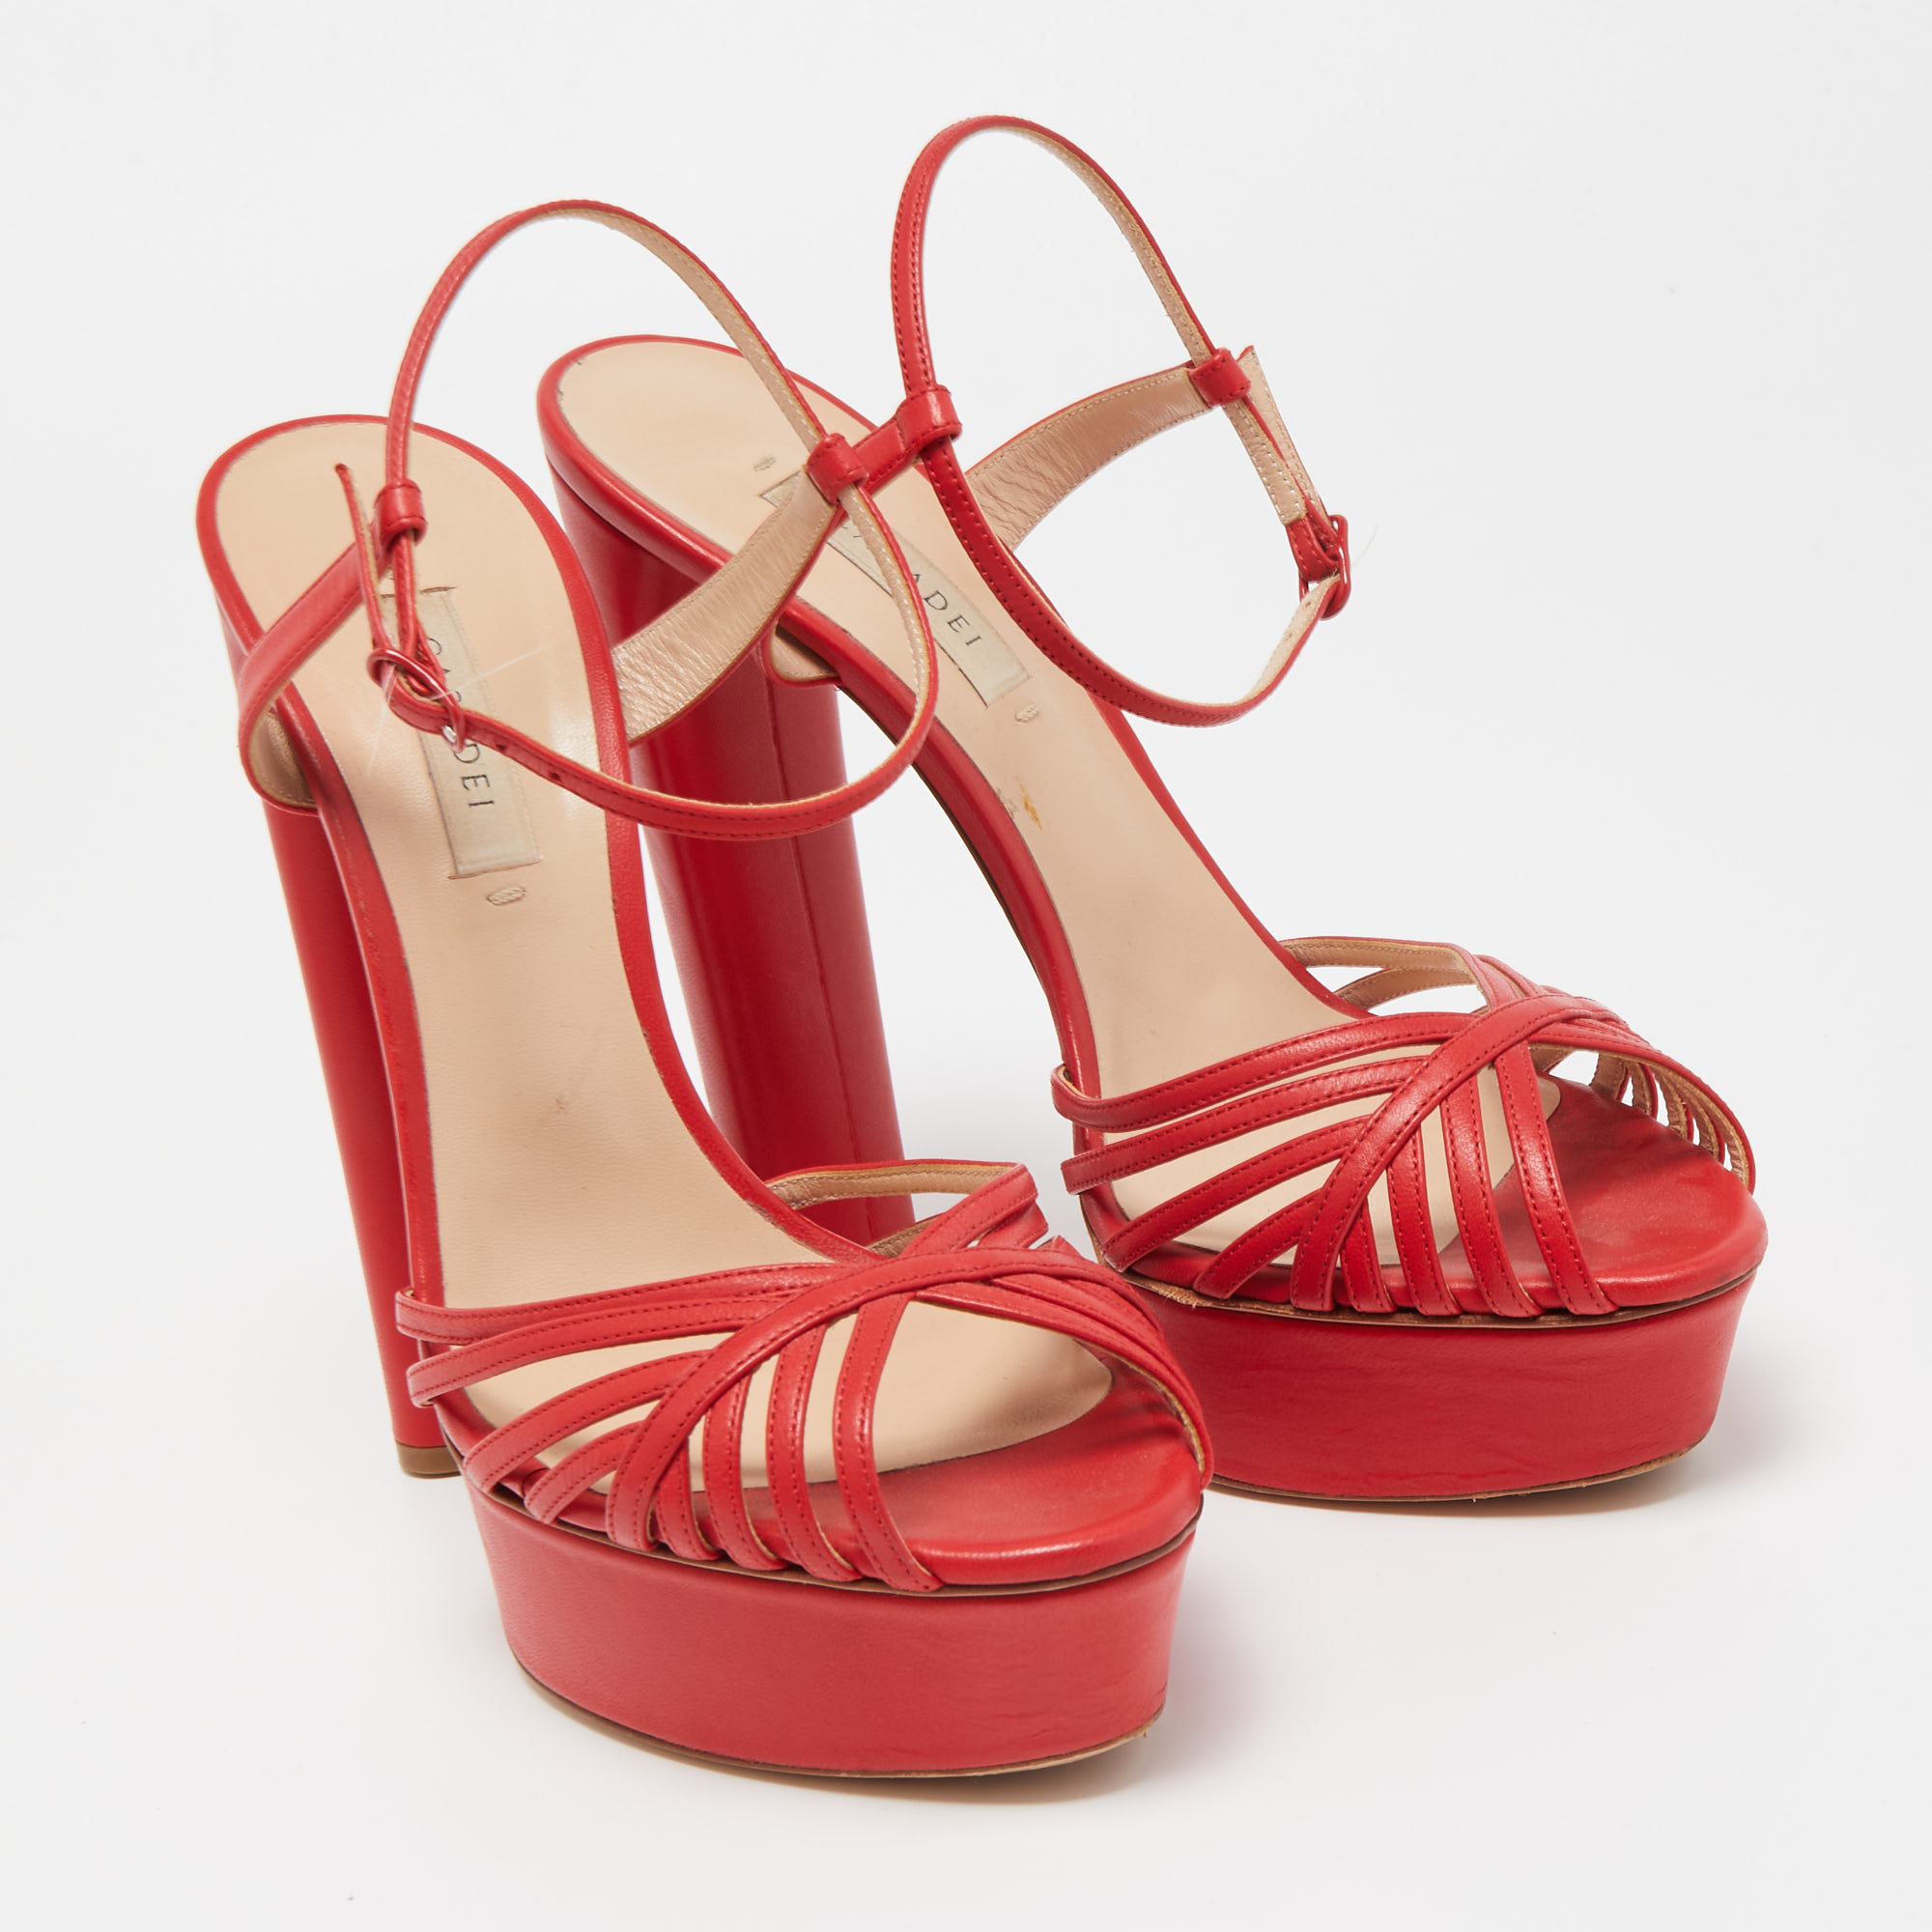 Casadei Red Leather Open Toe Platform Ankle Strap Sandals Size 39